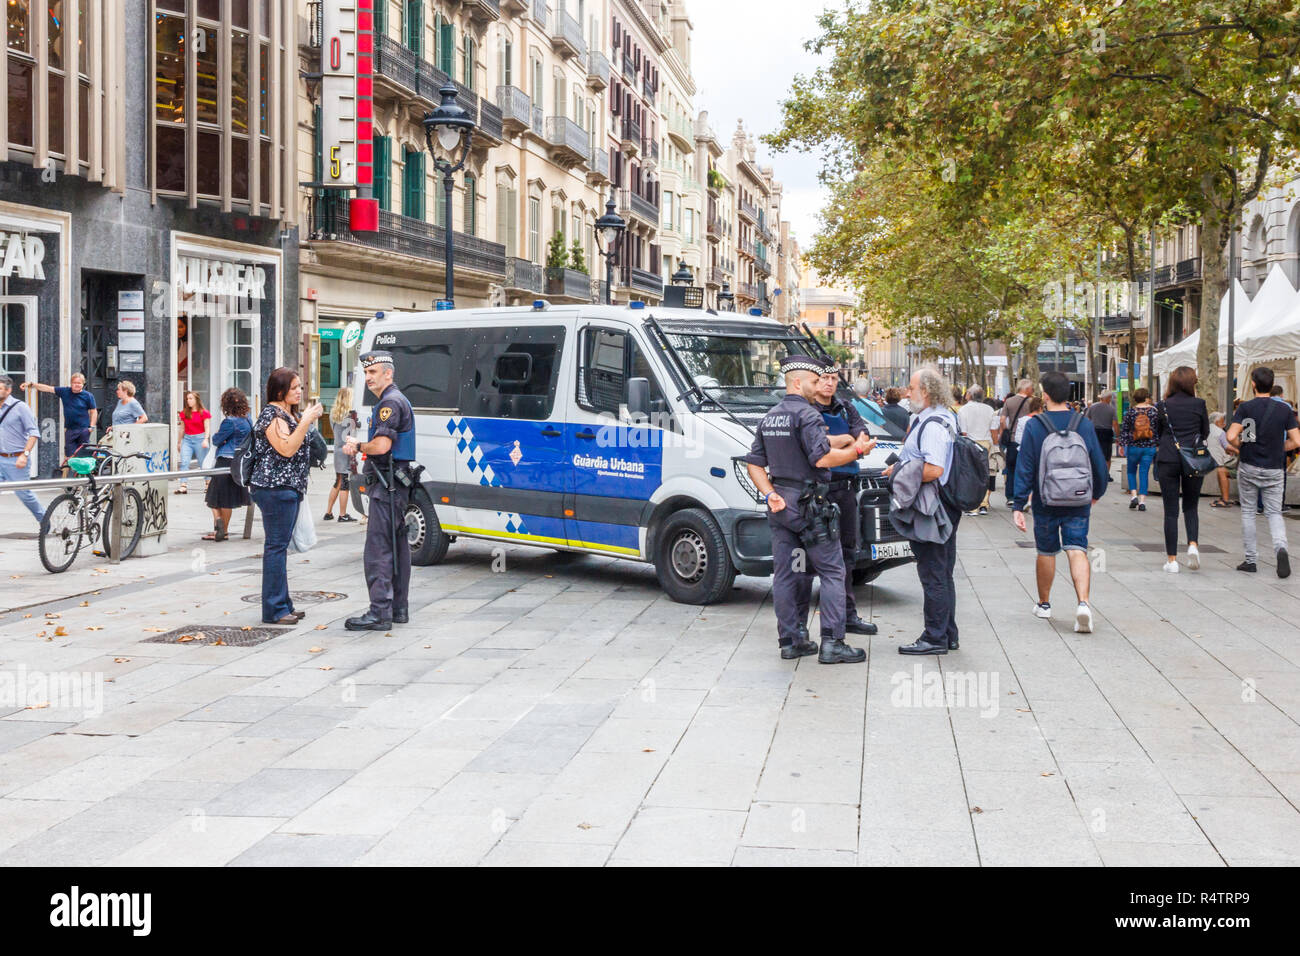 Barcelona, Spain - 4th October 2017: A police car guards a pedestrian street against terror attacks. Authorities in major cities are on high alert. Stock Photo